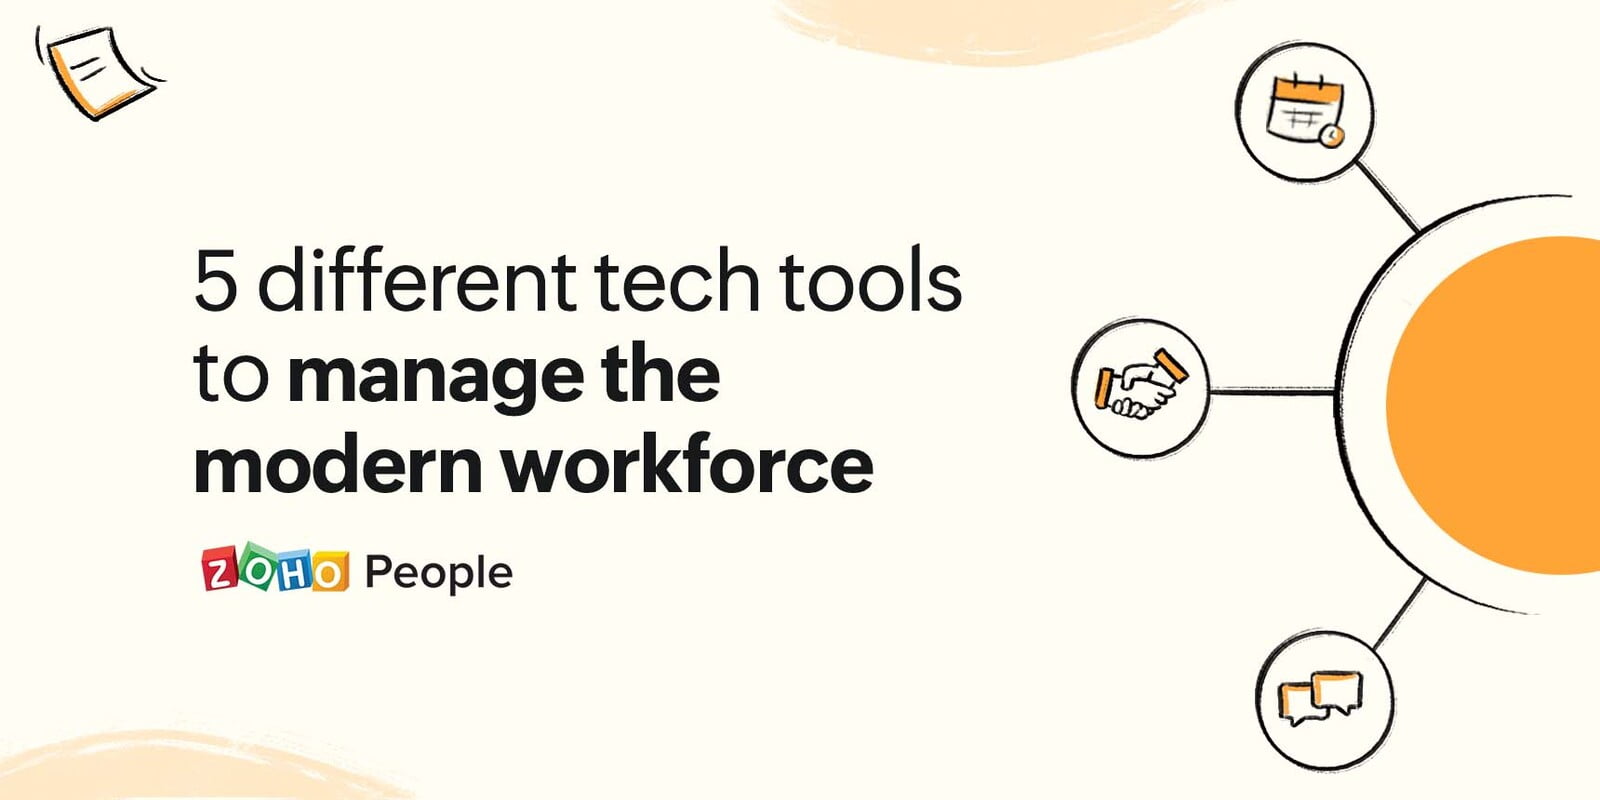 5 technological tools that make employee management simple